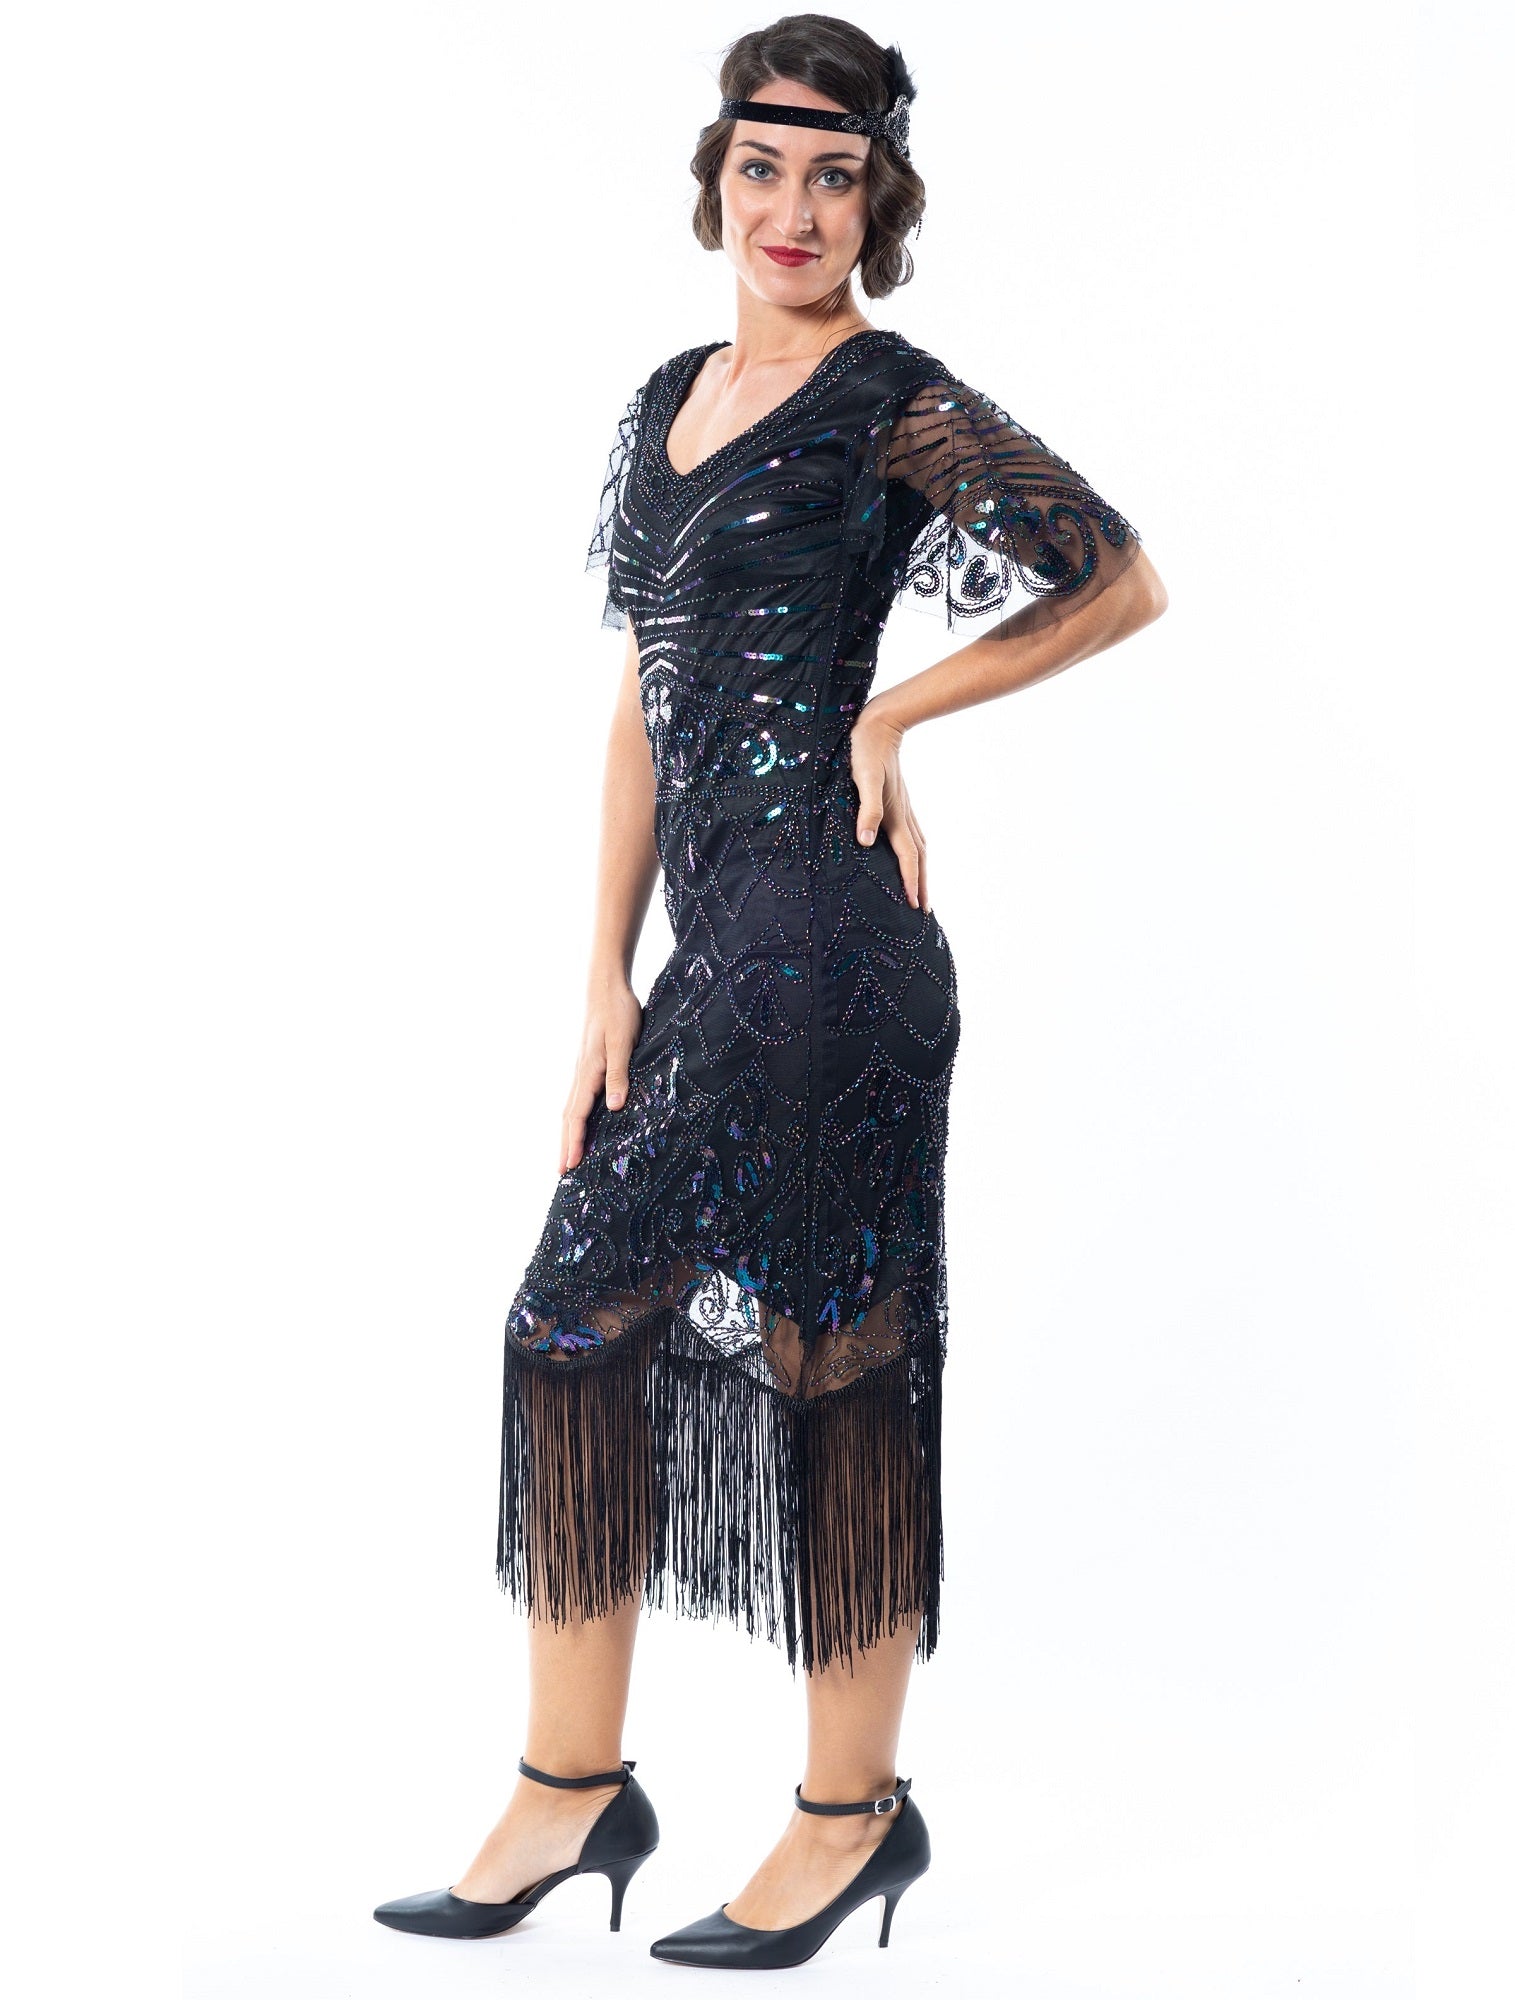 A Black Gatsby Dress with black beads and short sleeves